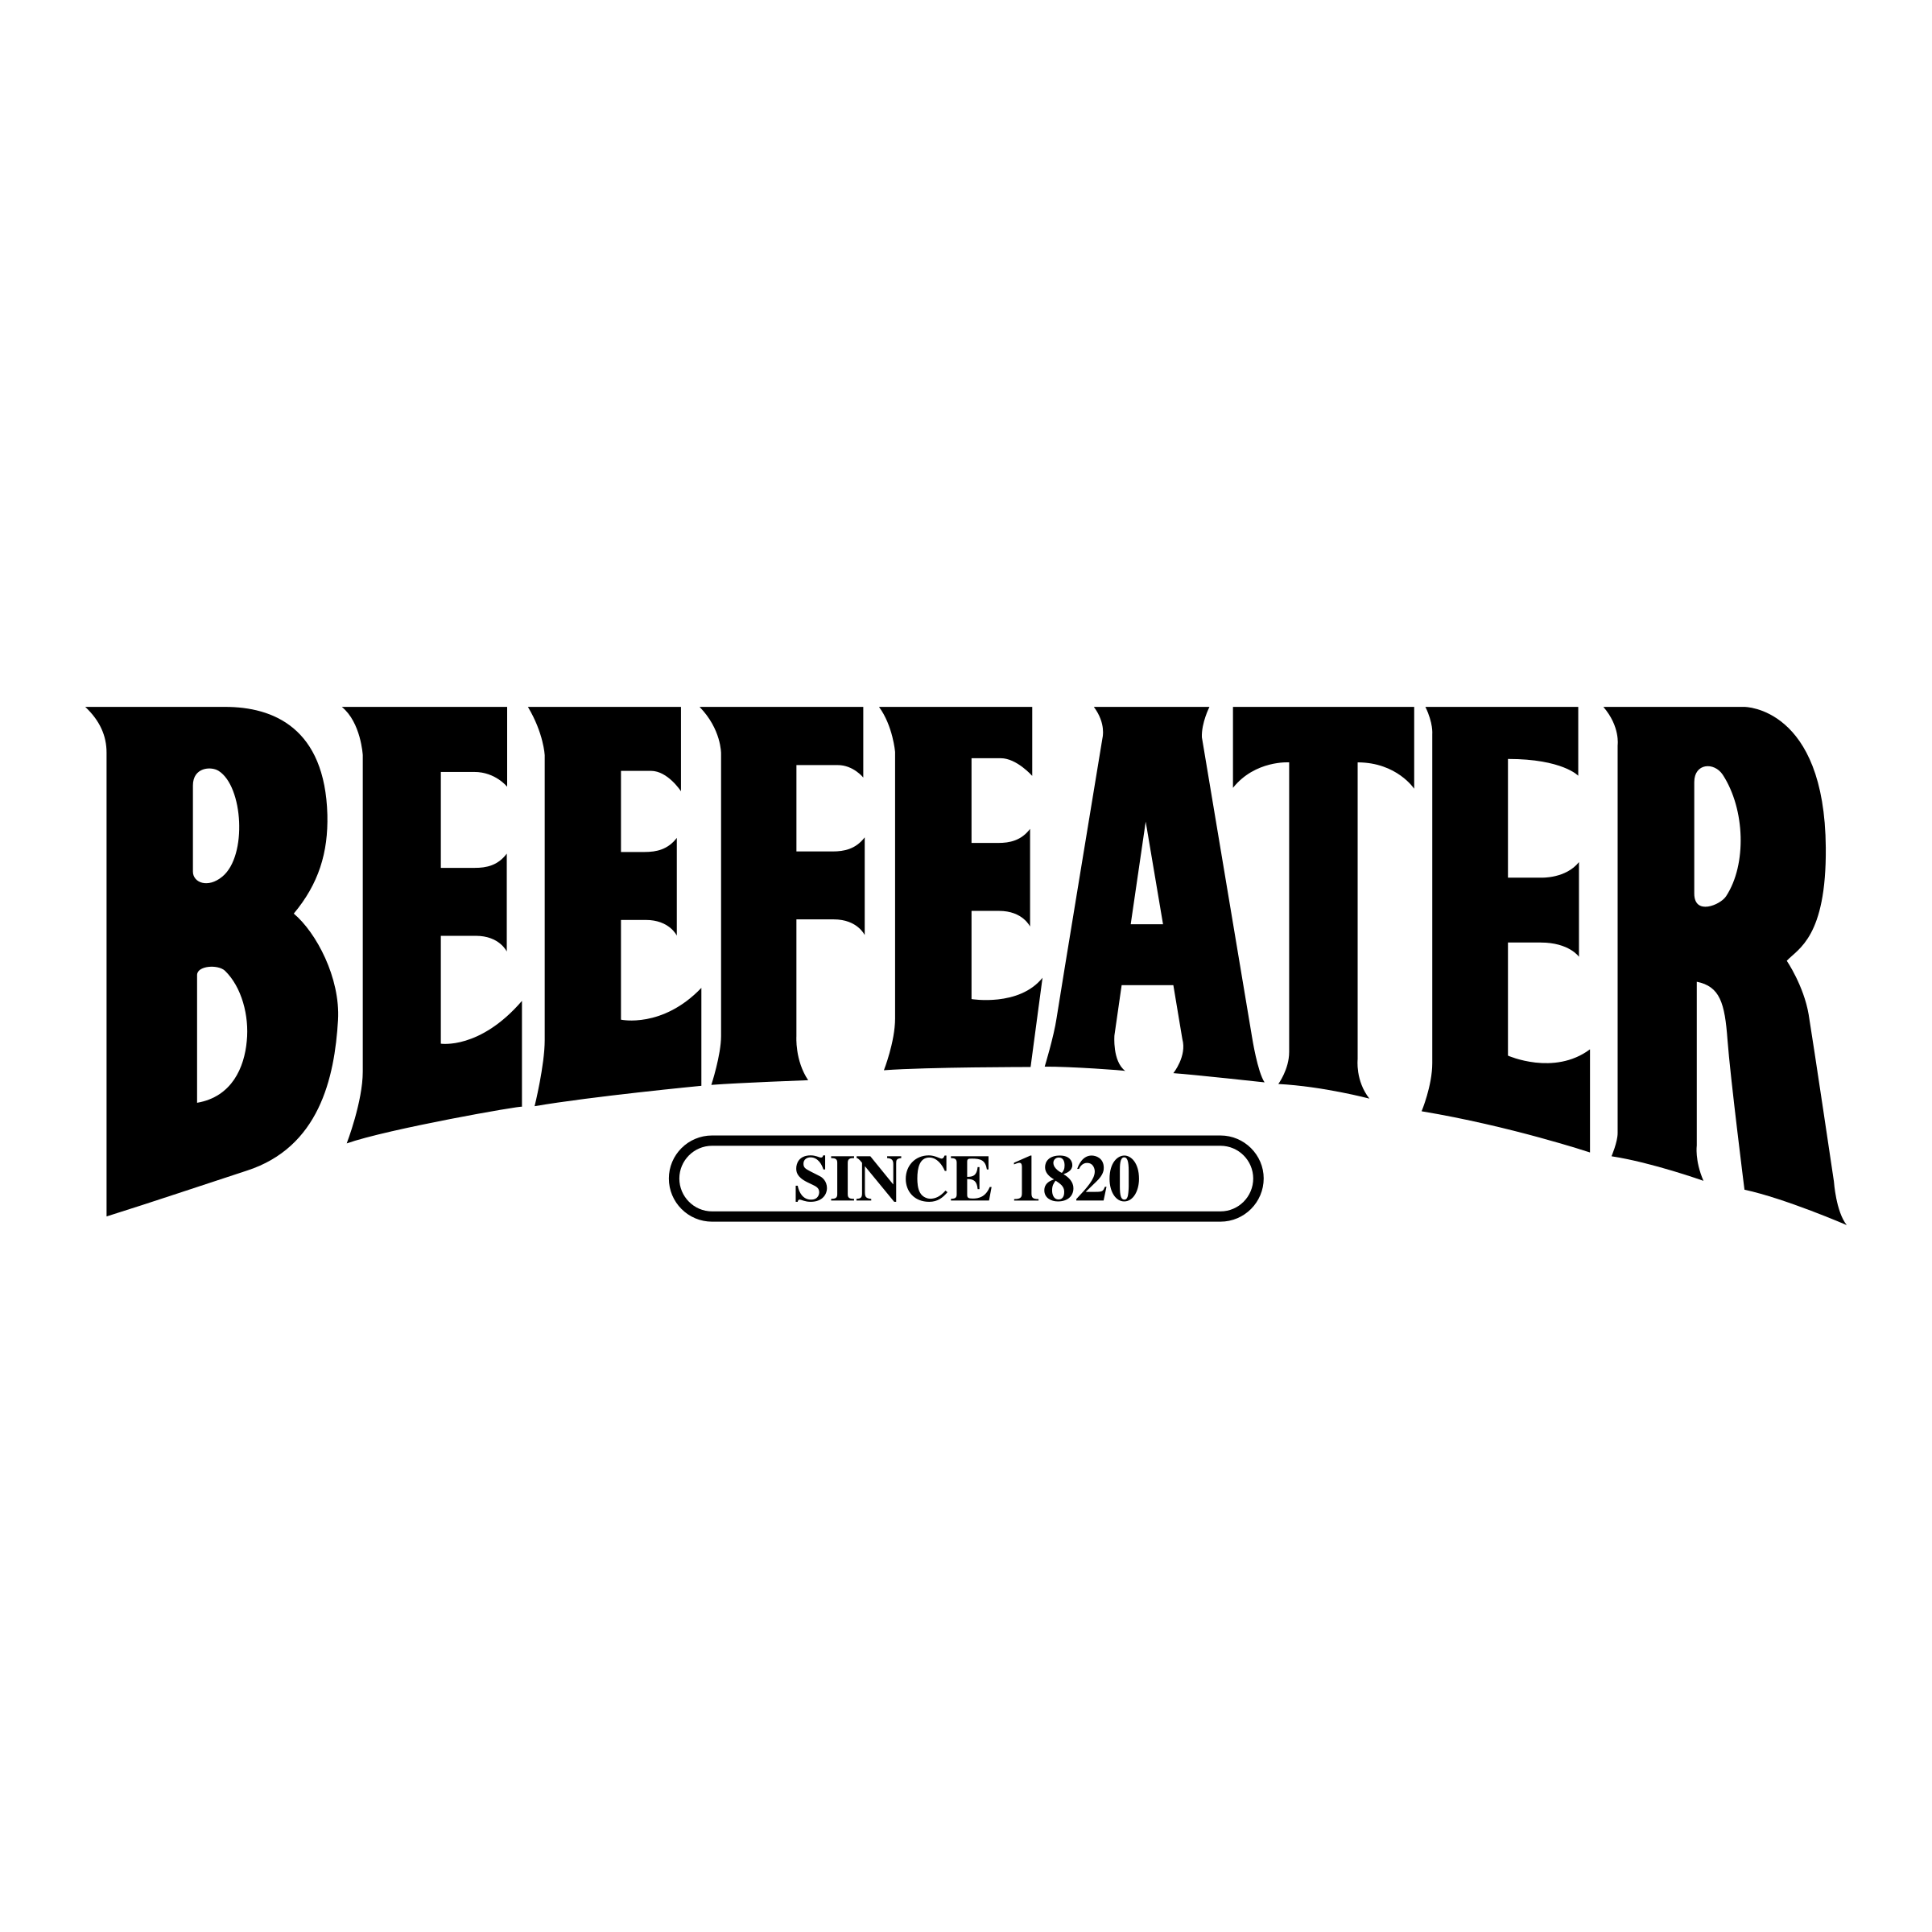 Beefeater Logo - Beefeater Logo PNG Transparent & SVG Vector - Freebie Supply